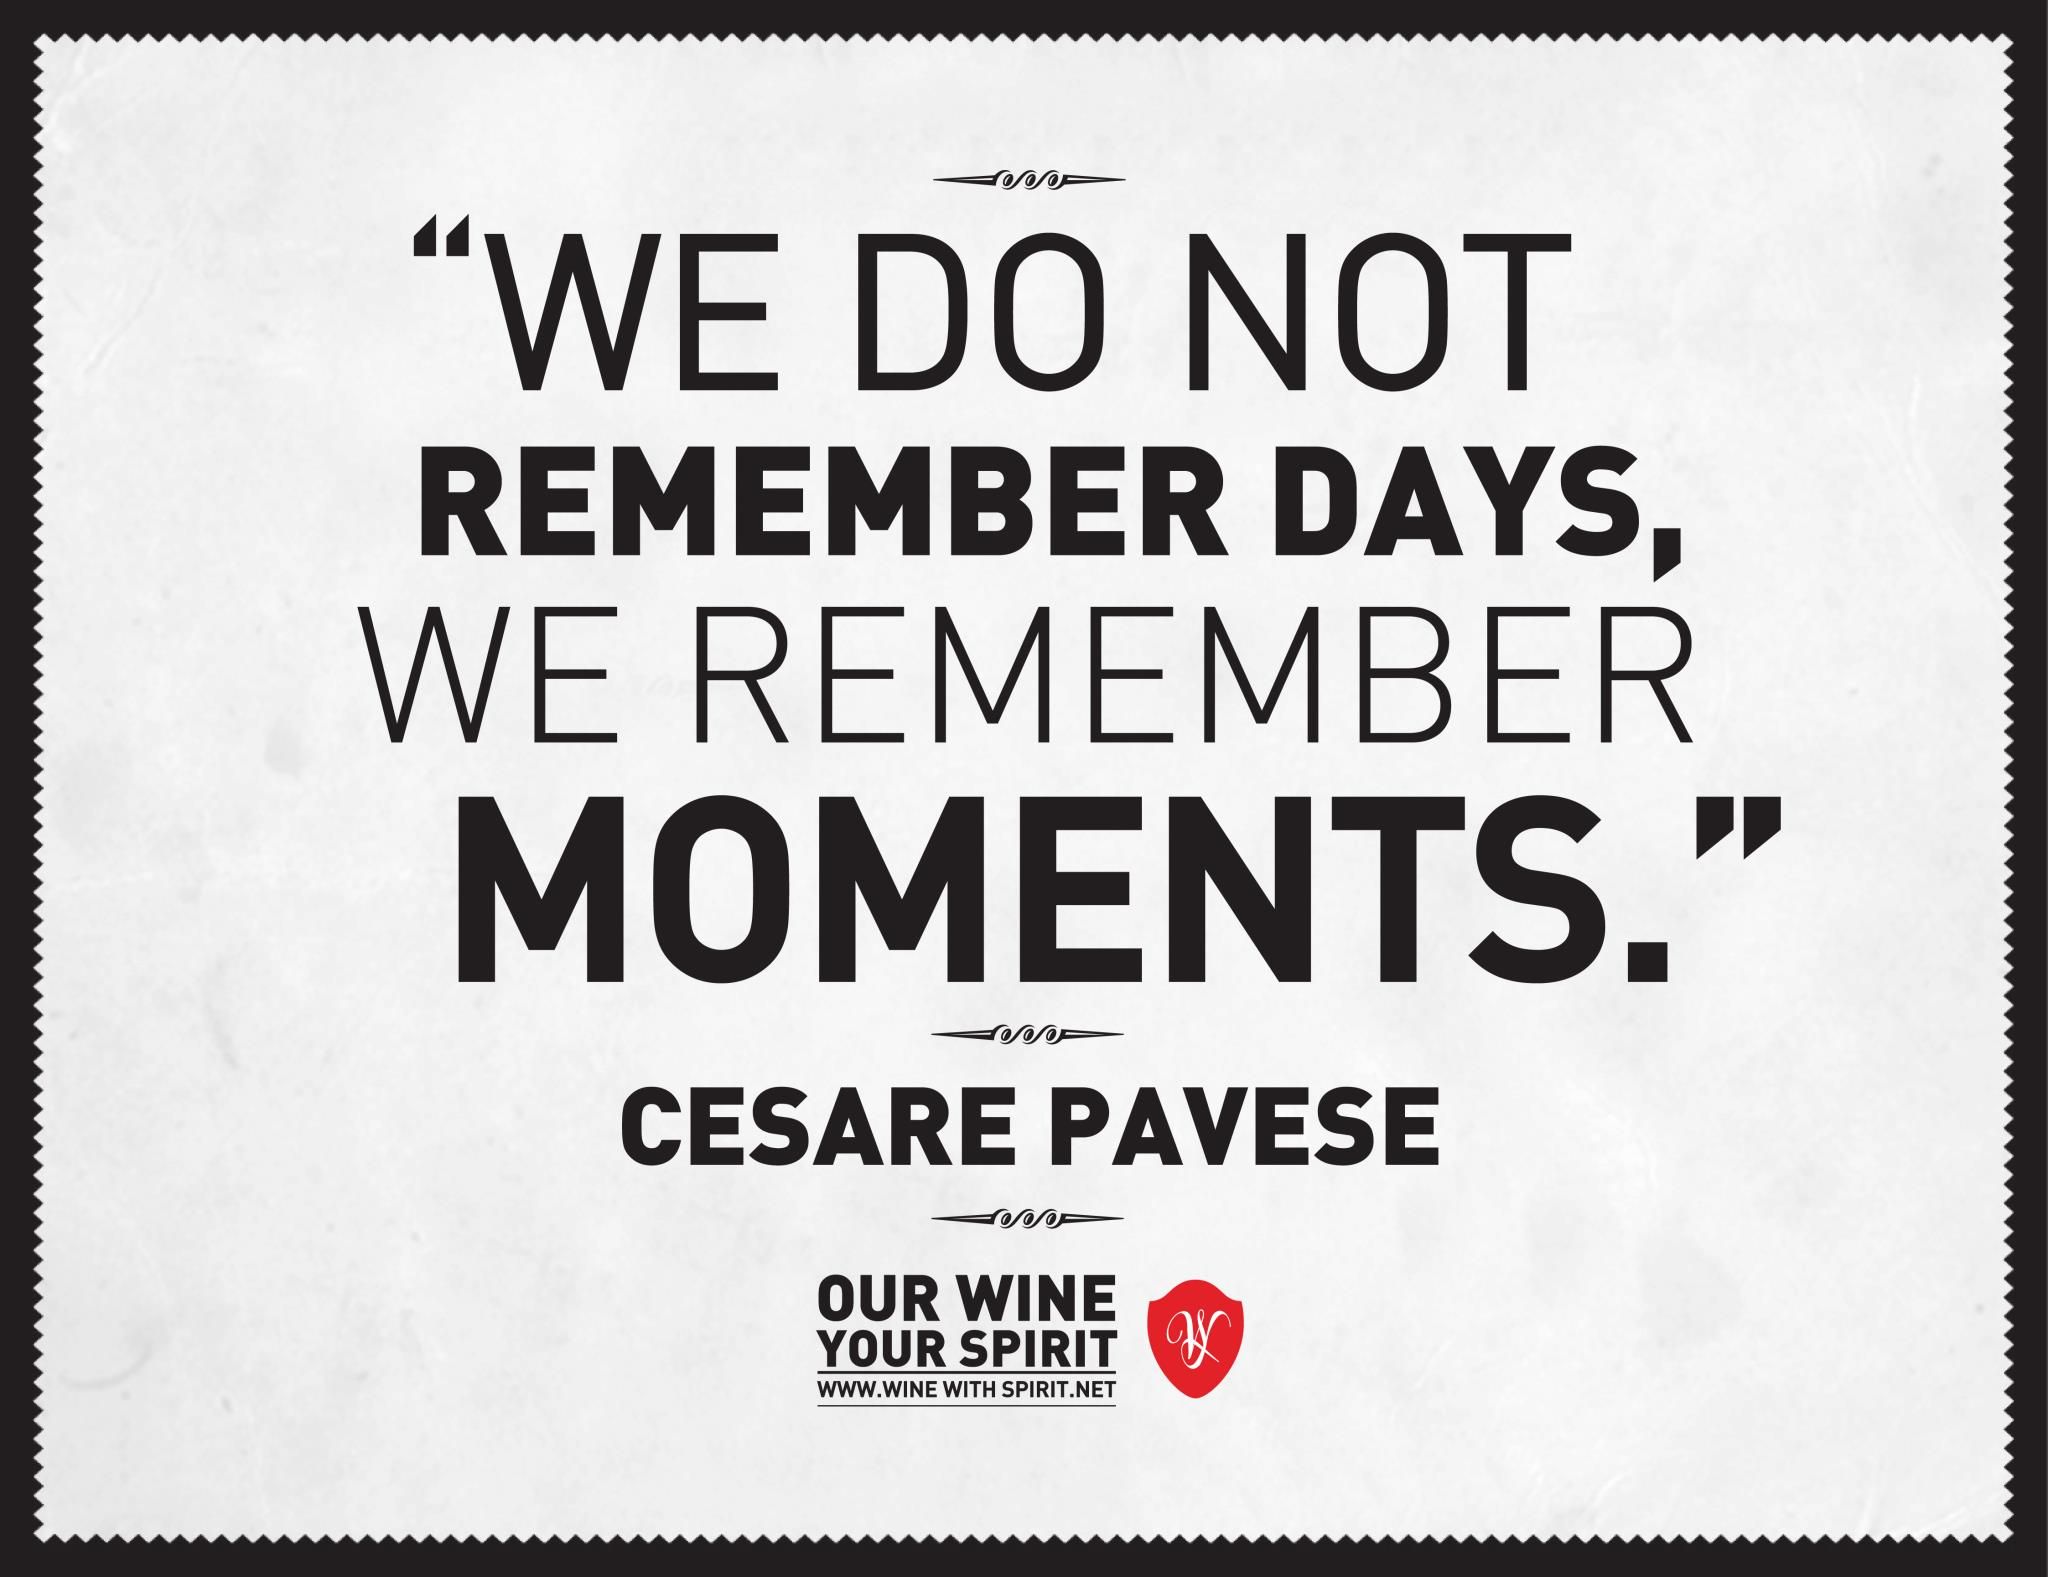 #wine #quote #pavese